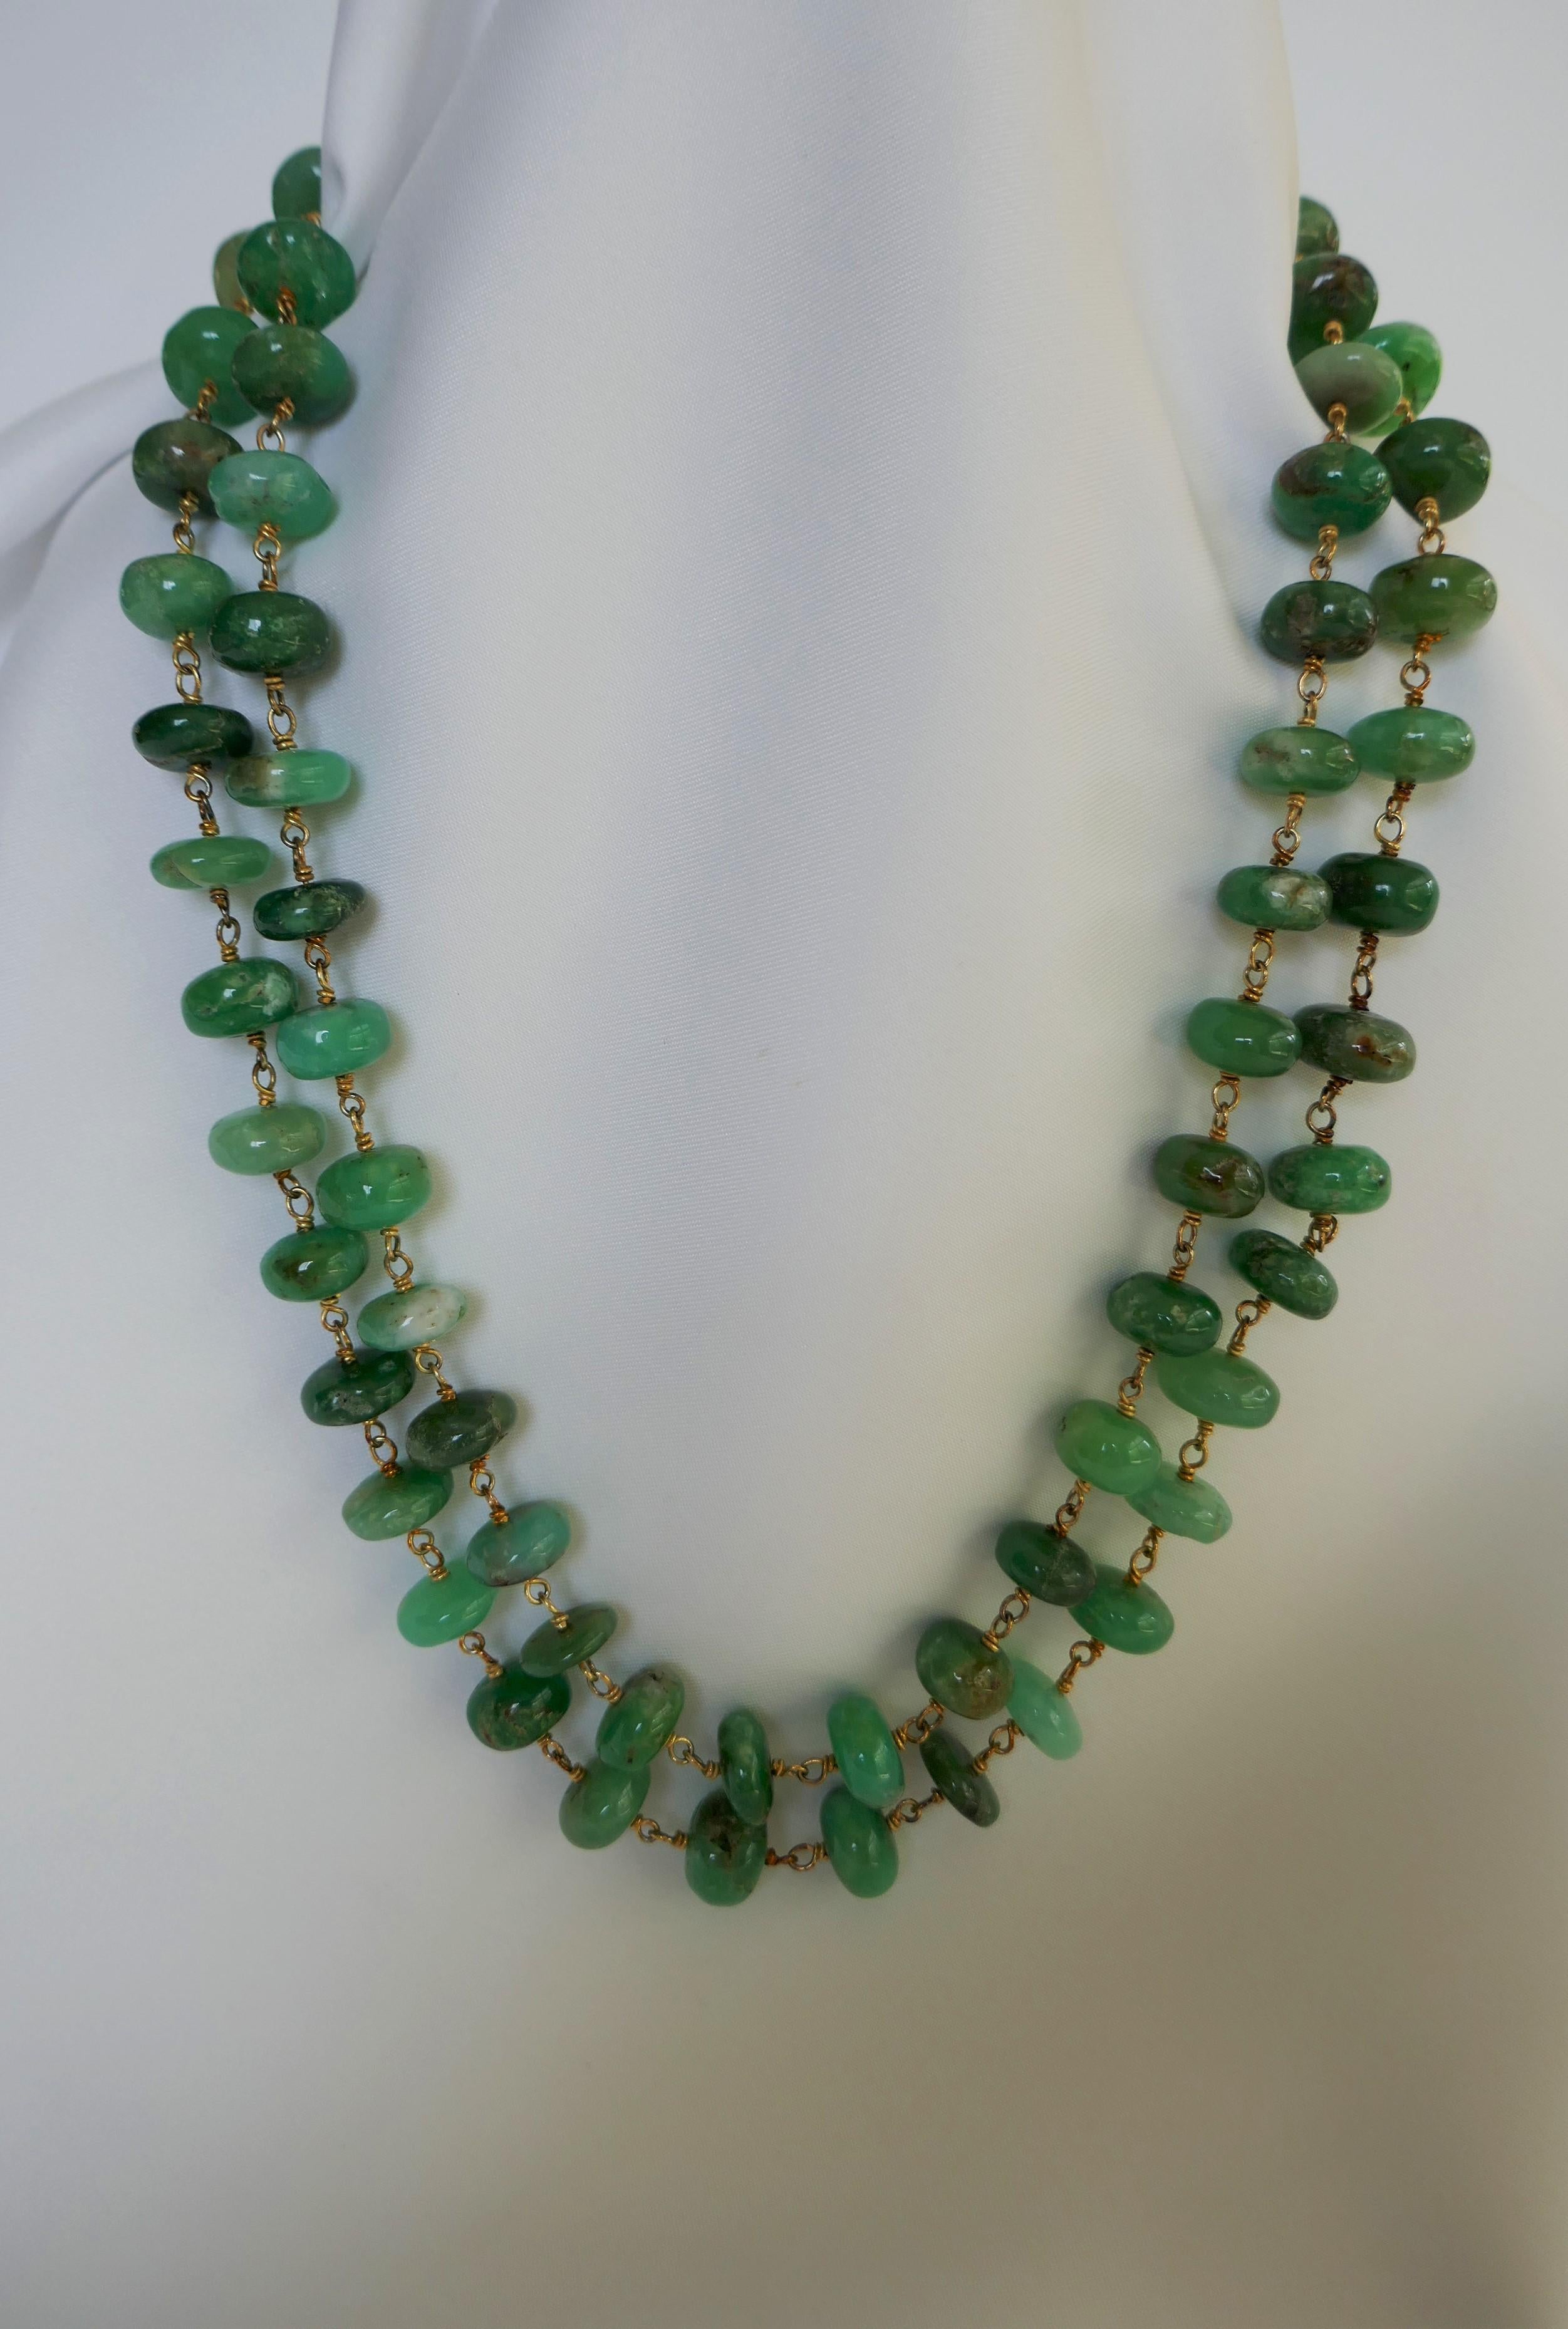 This necklace is made of  12mm - 13mm Chrysophrase (apple green and other green tonalities) roundels wire wrapped on 14k 925 sterling silver wire with a 925 oxidized silver diamond clasp. The necklace may be worn long, doubled or layered. The